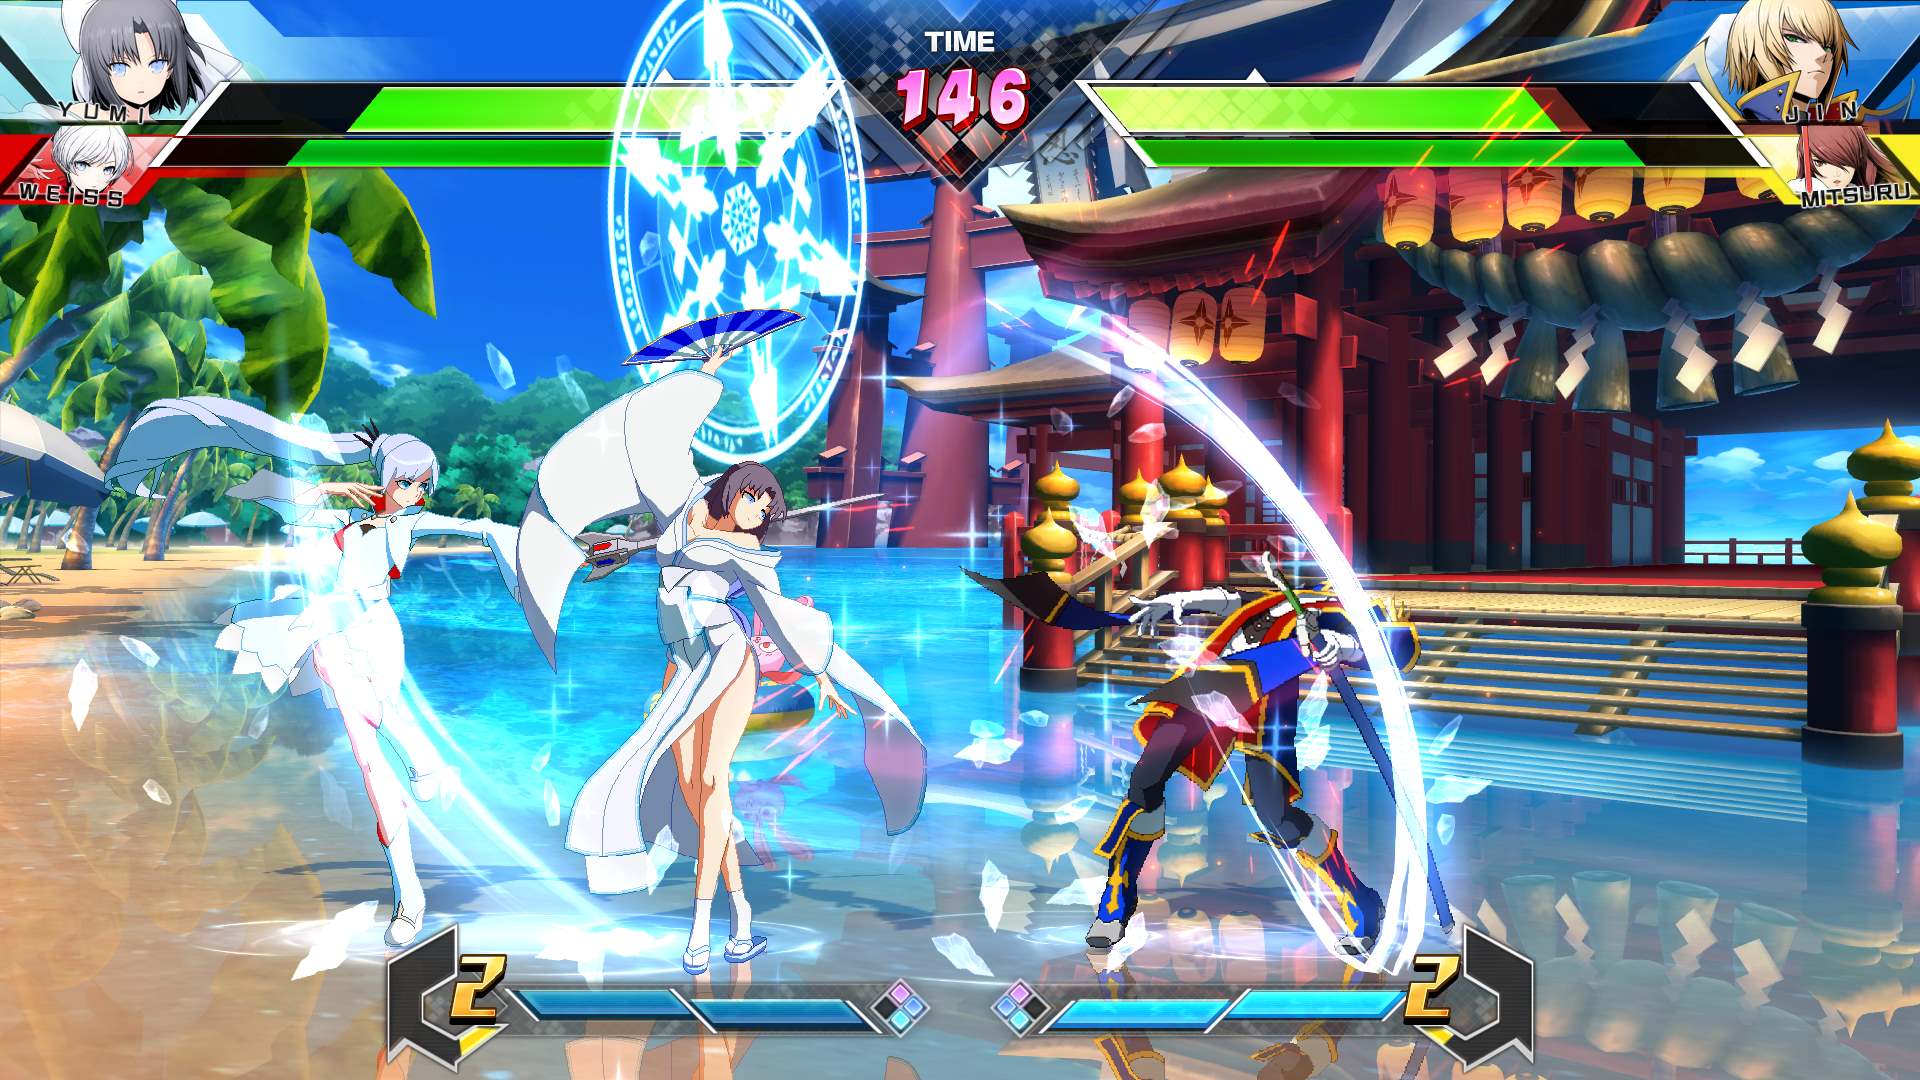 BlazBlue: Cross Tag Battle eclipses 450,000 copies sold 2 years after launch